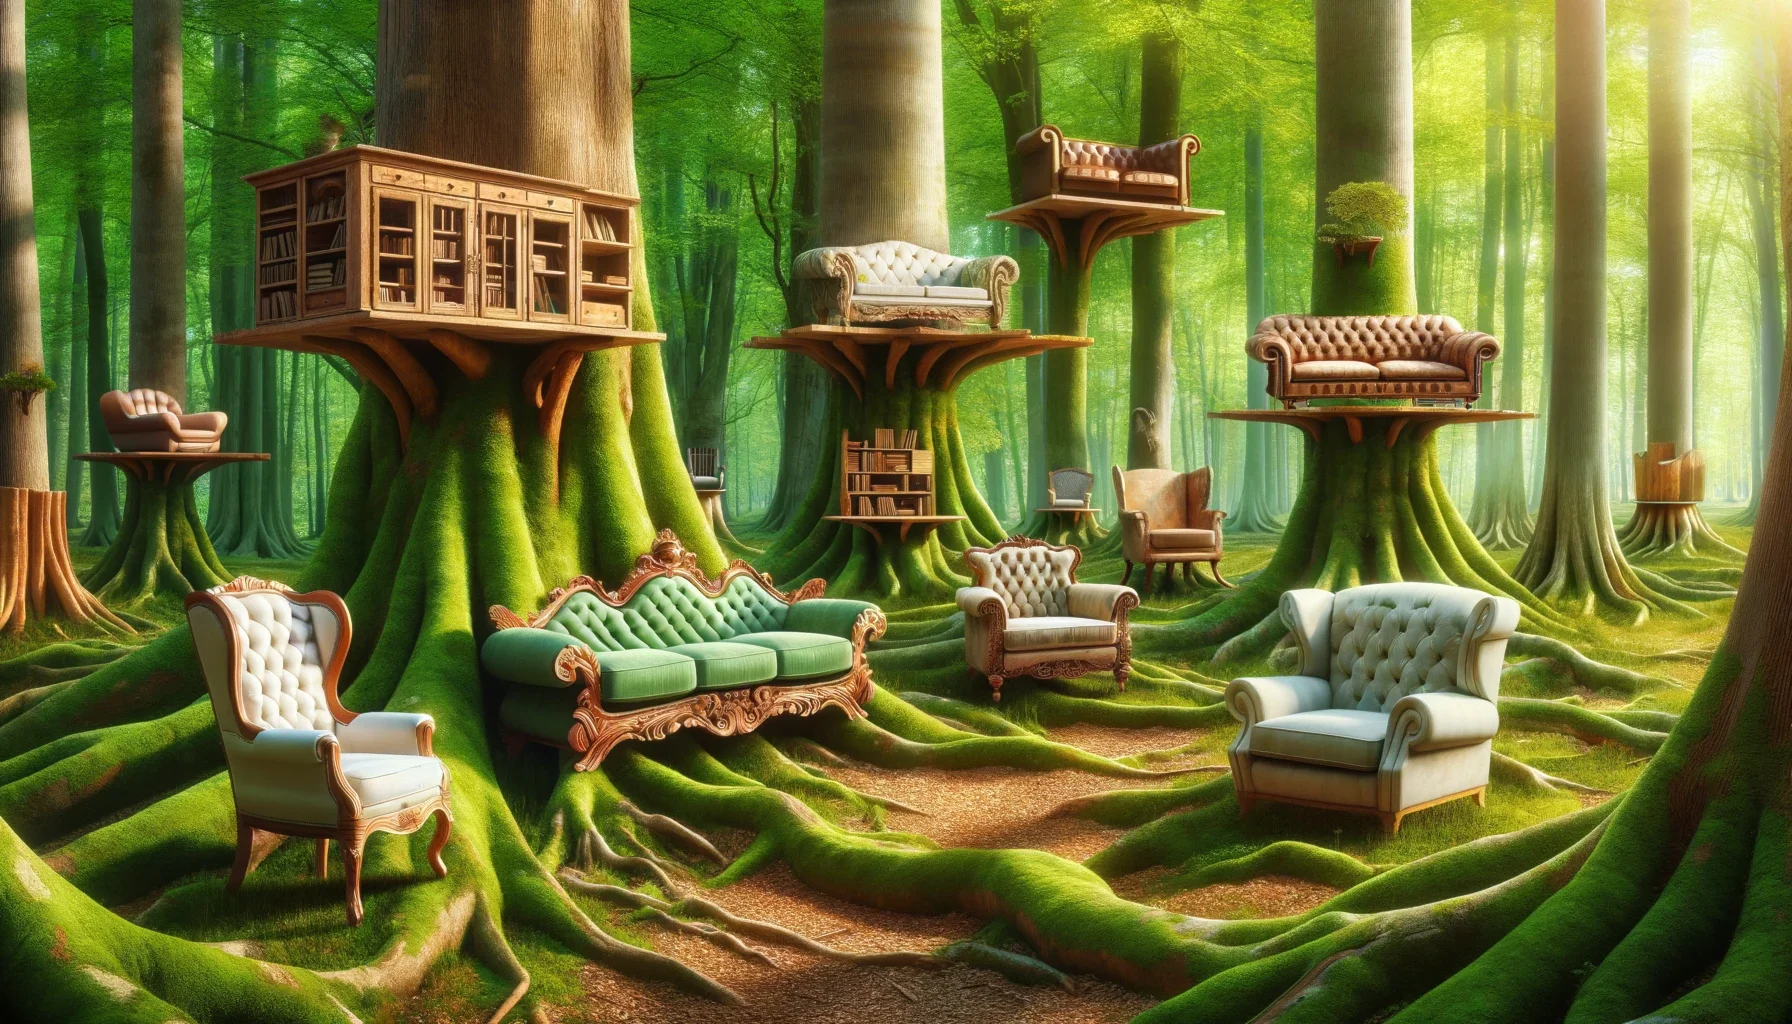 A rich and lively forest with furniture growing from the trees